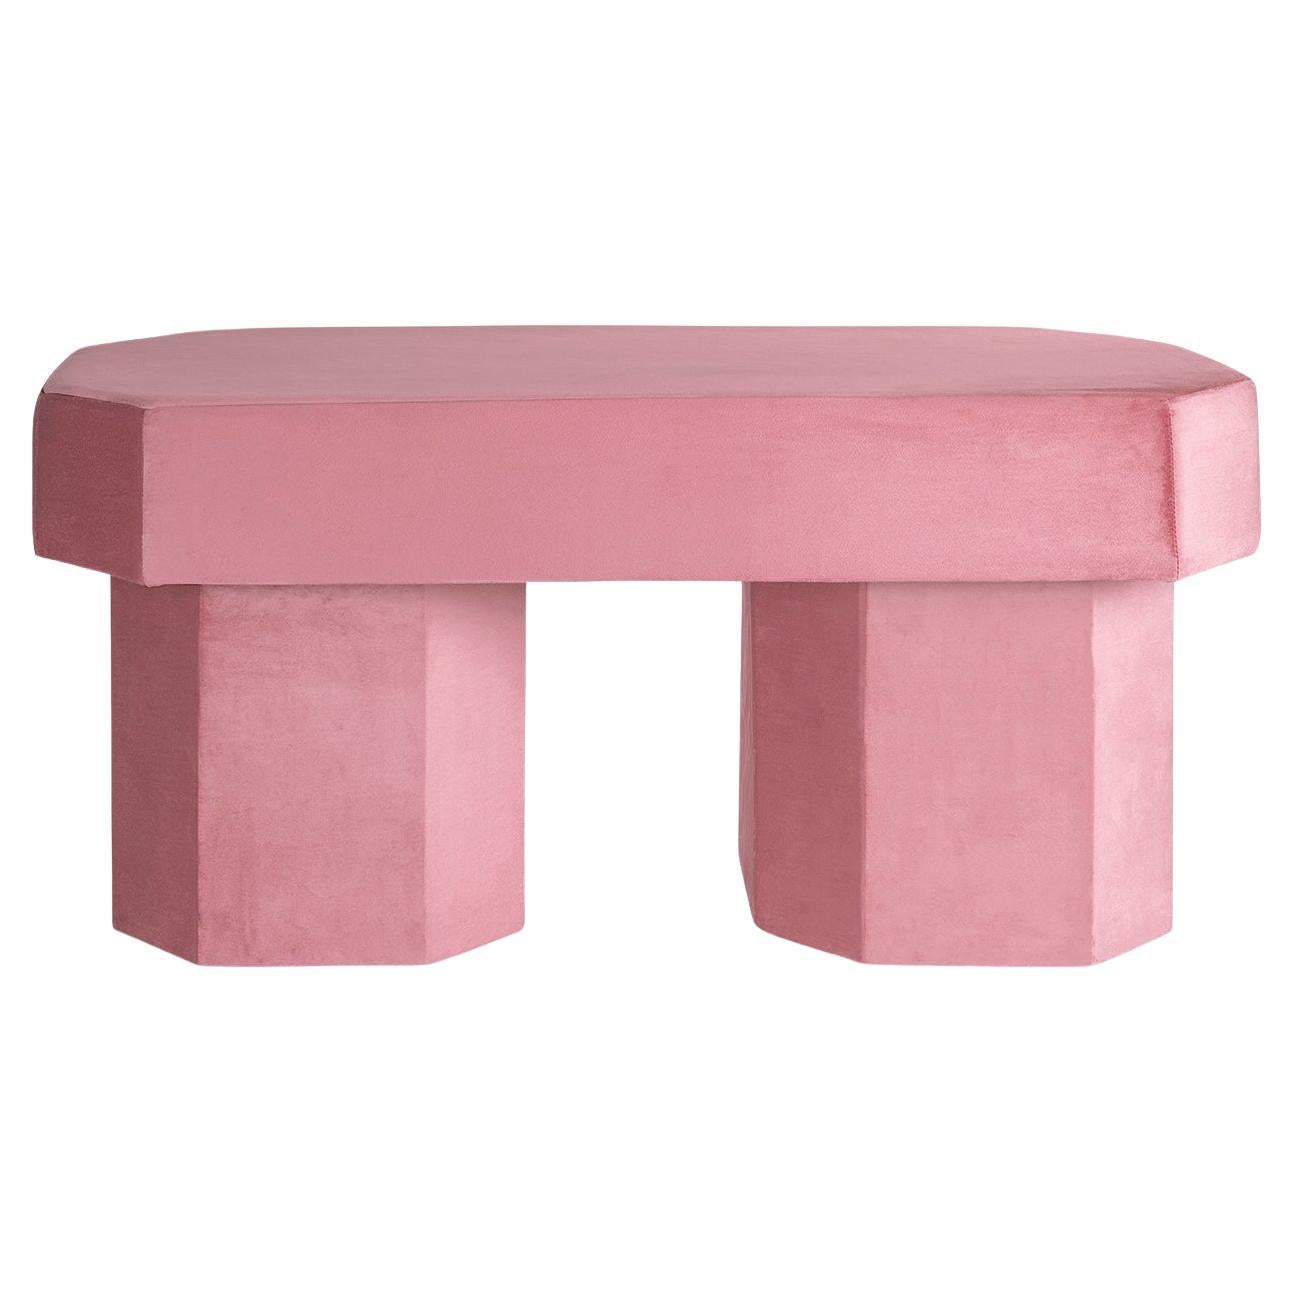 Viva Pink Bench by Houtique For Sale